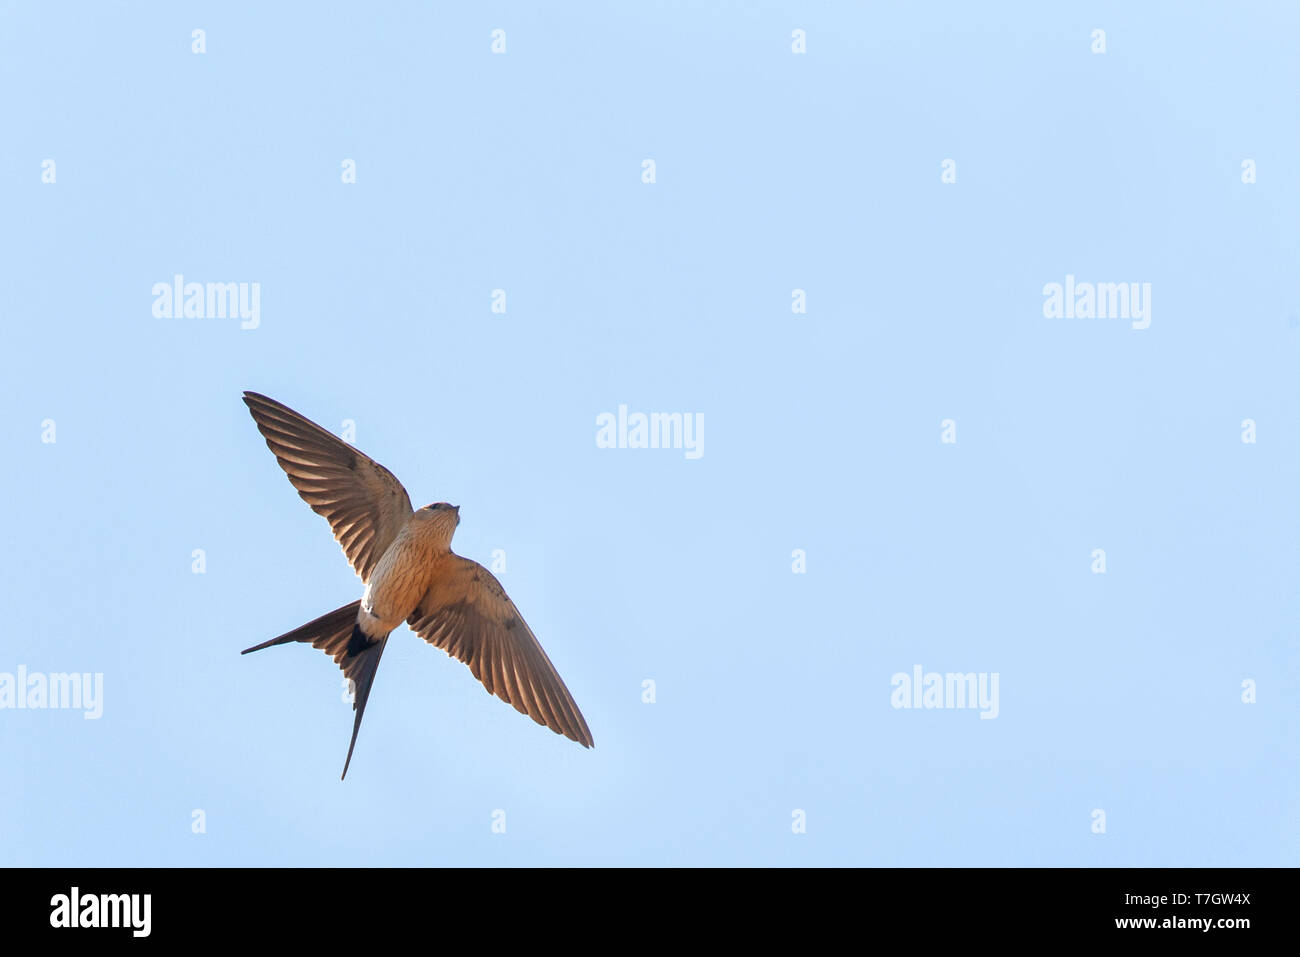 Adult Red-rumped Swallow (Cecropis daurica) in flight against a blue sky as background during spring on the  Aegean island Lesvos in Greece. Seen from Stock Photo